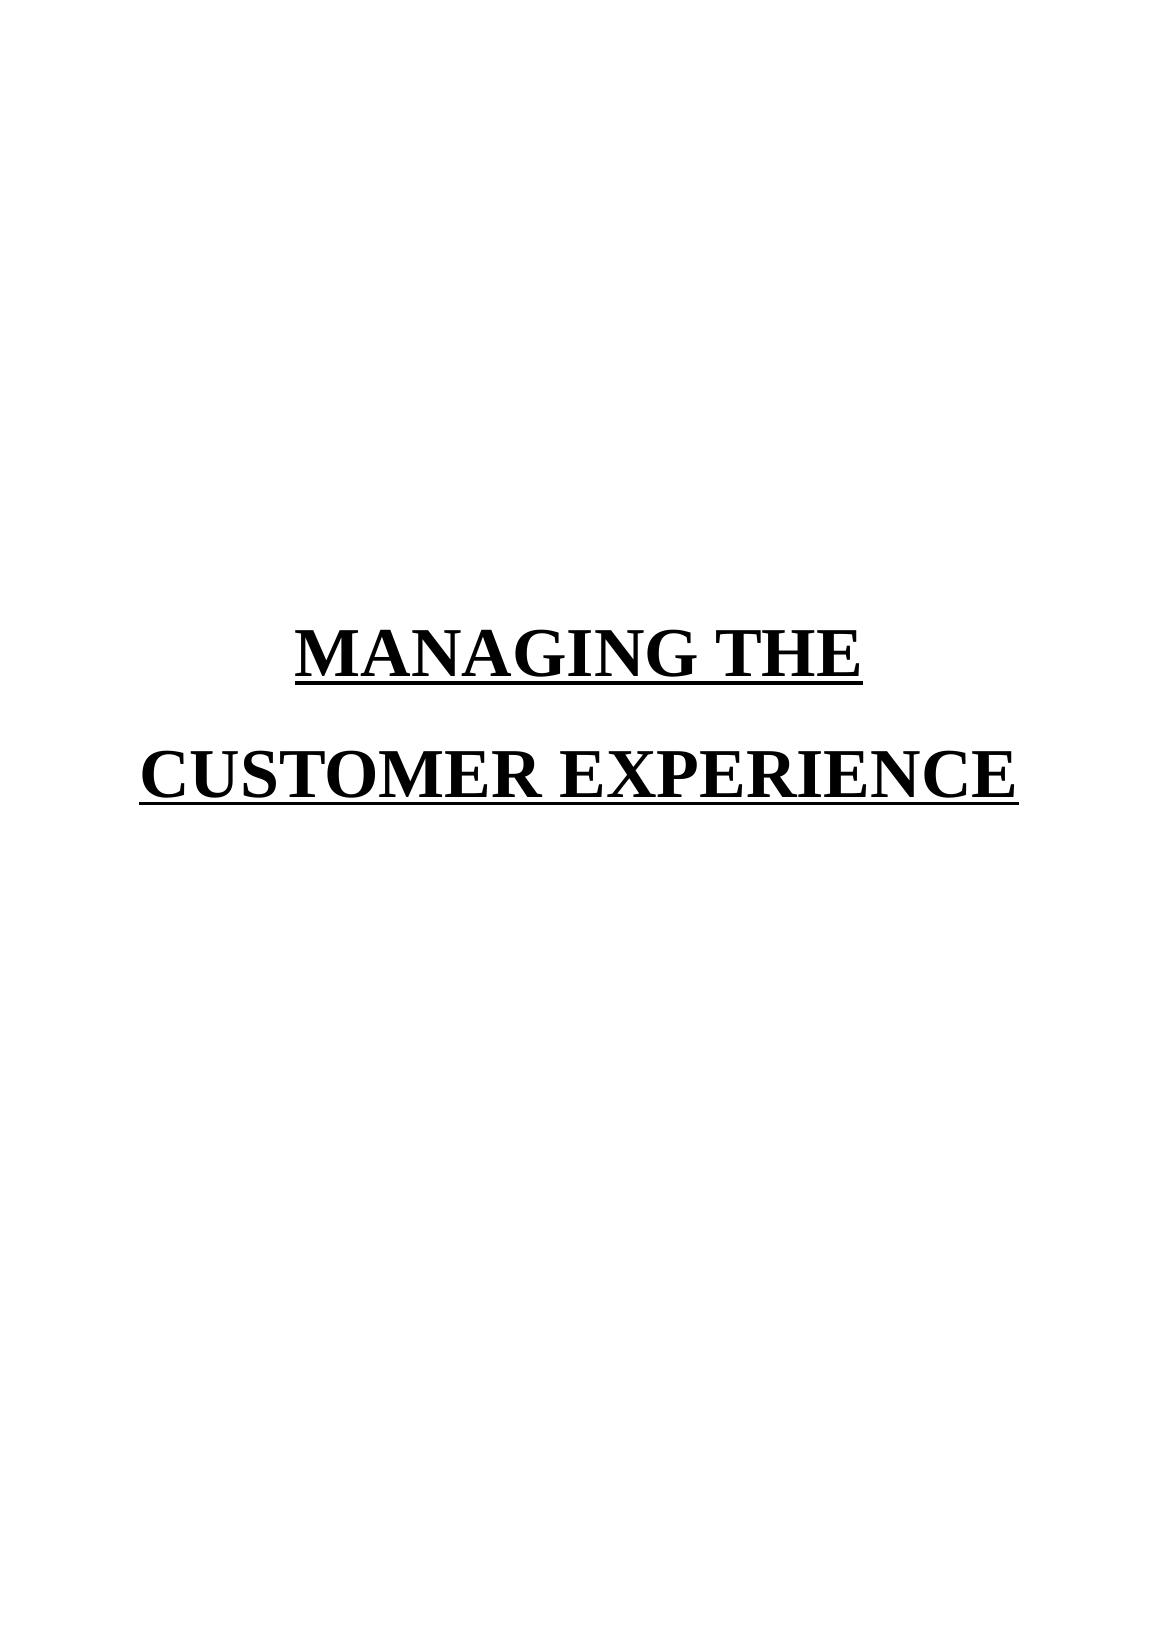 Managing the Customer Experience  (doc)_1